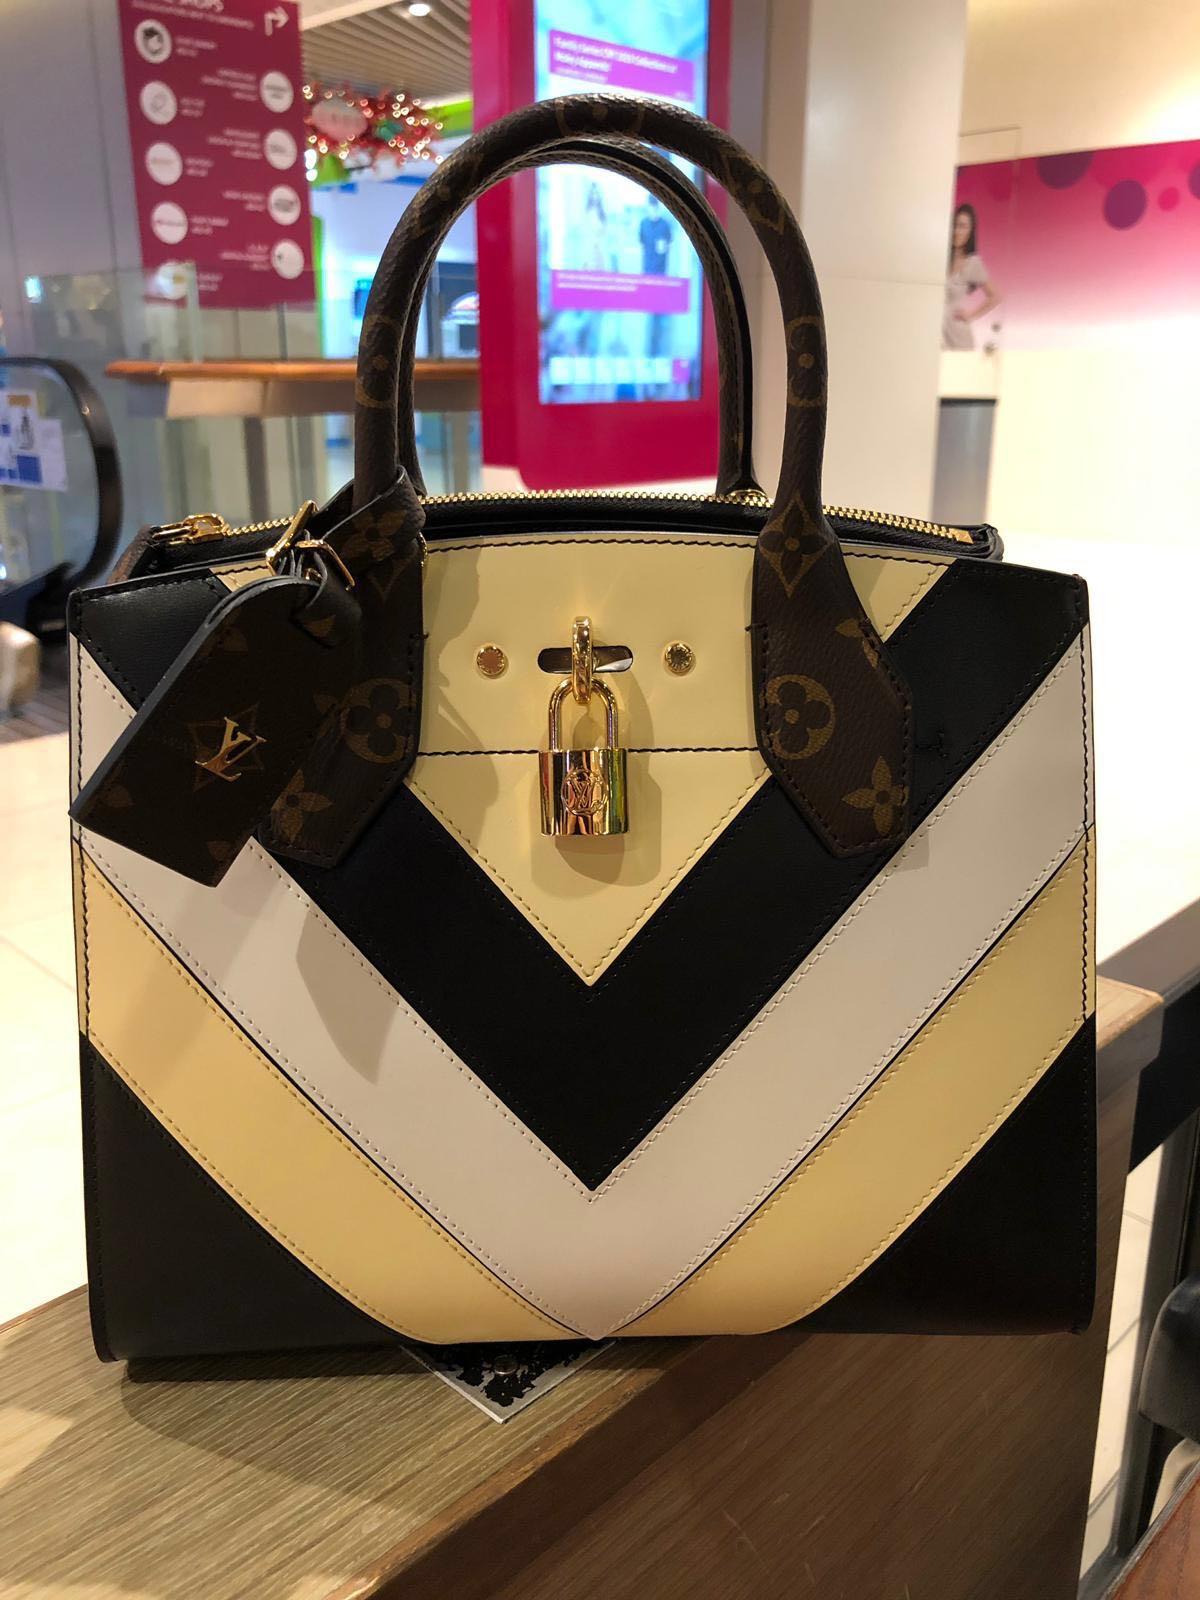 Louis Vuitton Pink/Cream Taurillon Leather and Python City Steamer